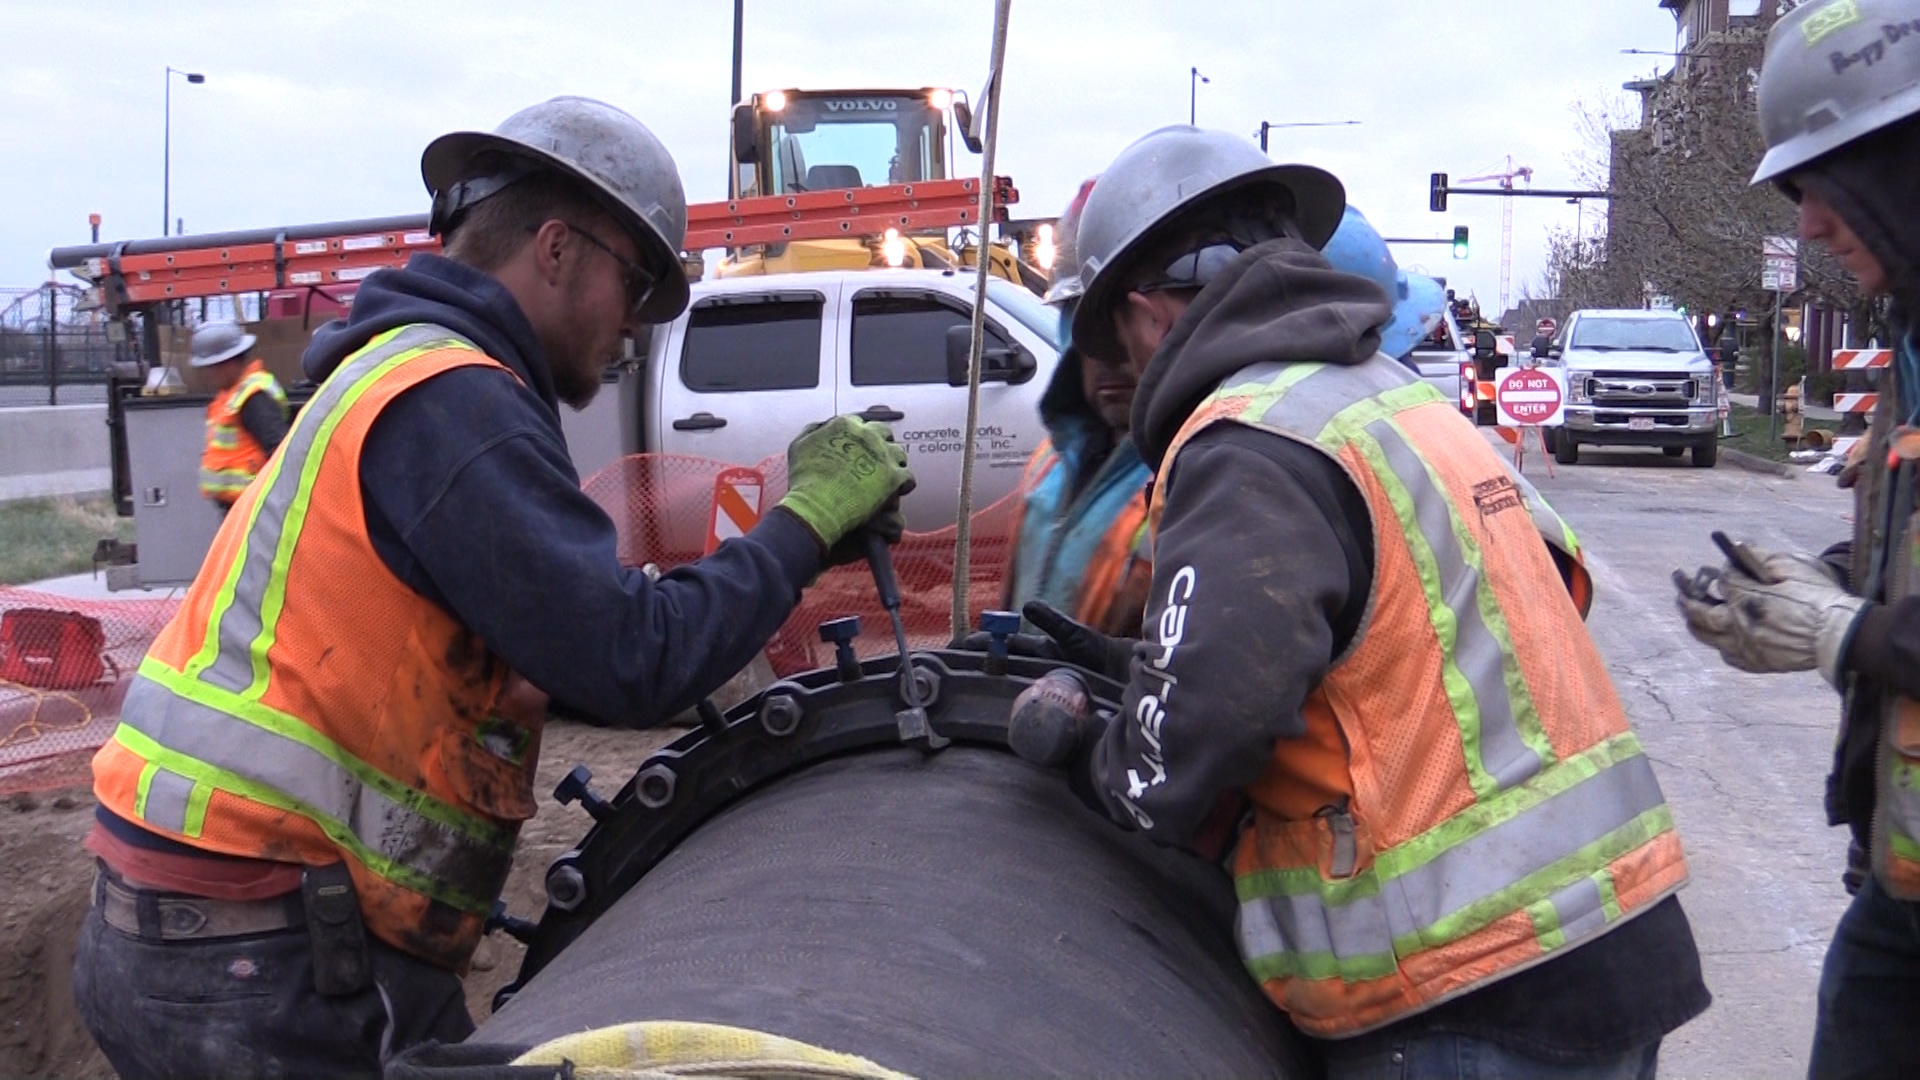 Crews from Concrete Works of Colorado prepare a pipe for installation in Denver's Highland neighborhood in April 2018.